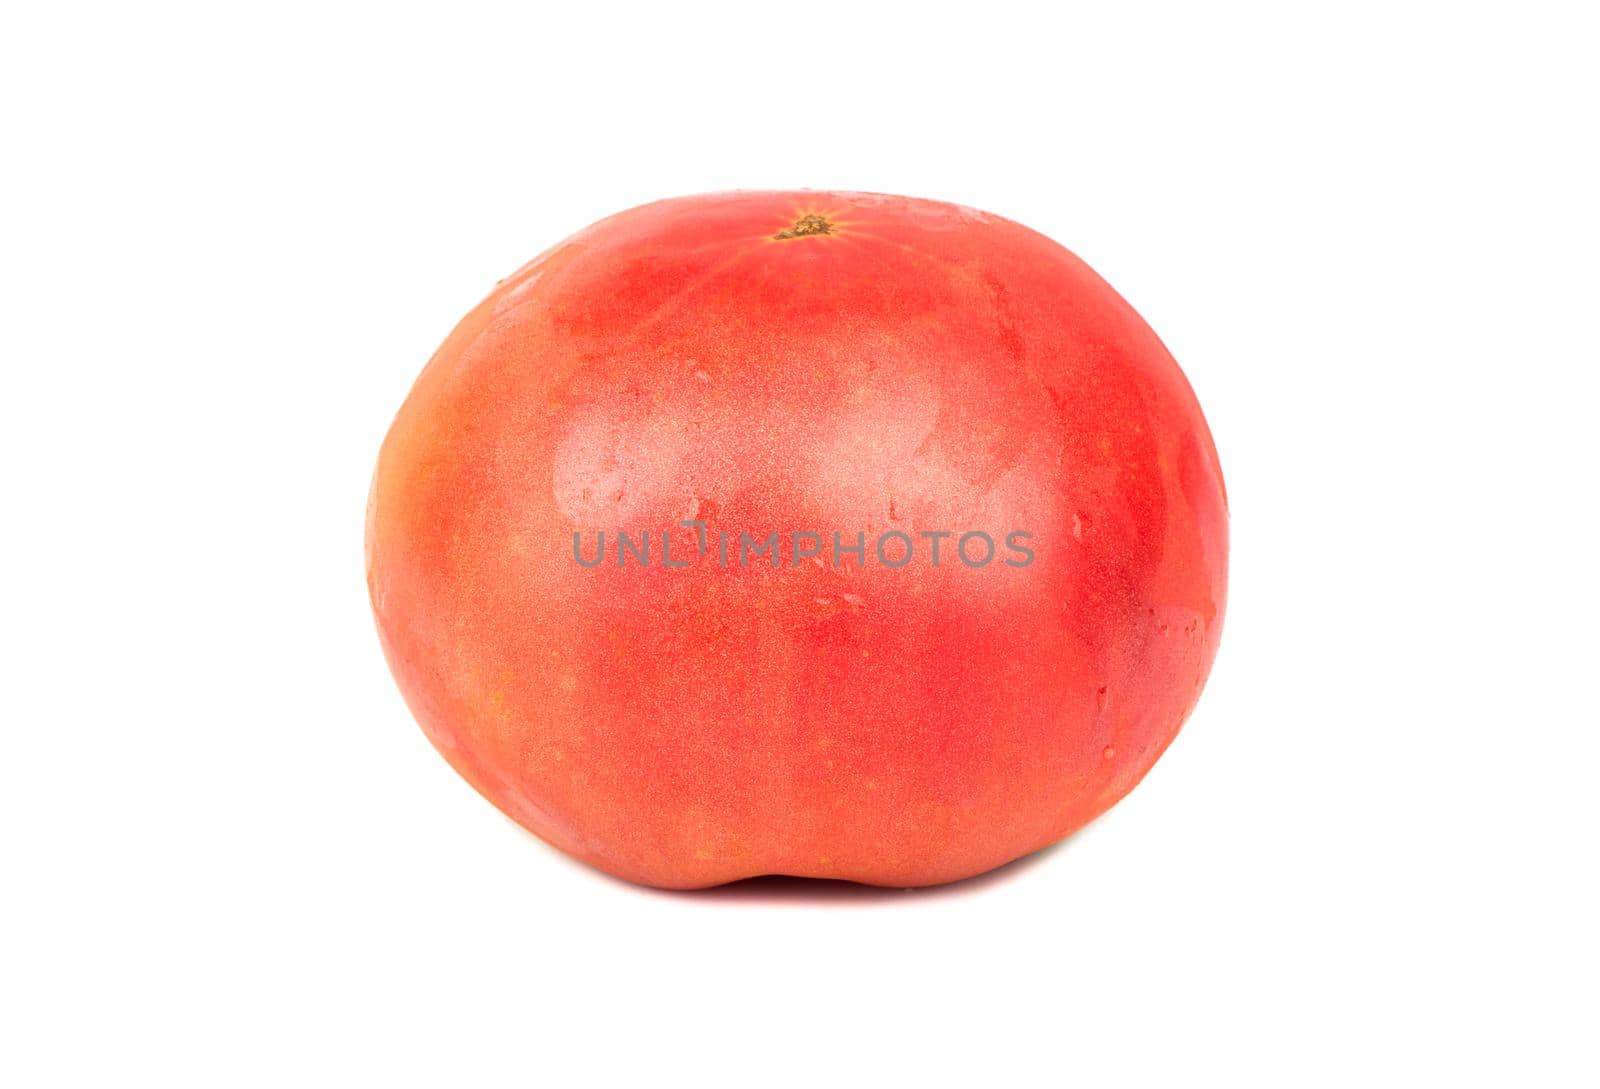 Big red tomato isolated on white background